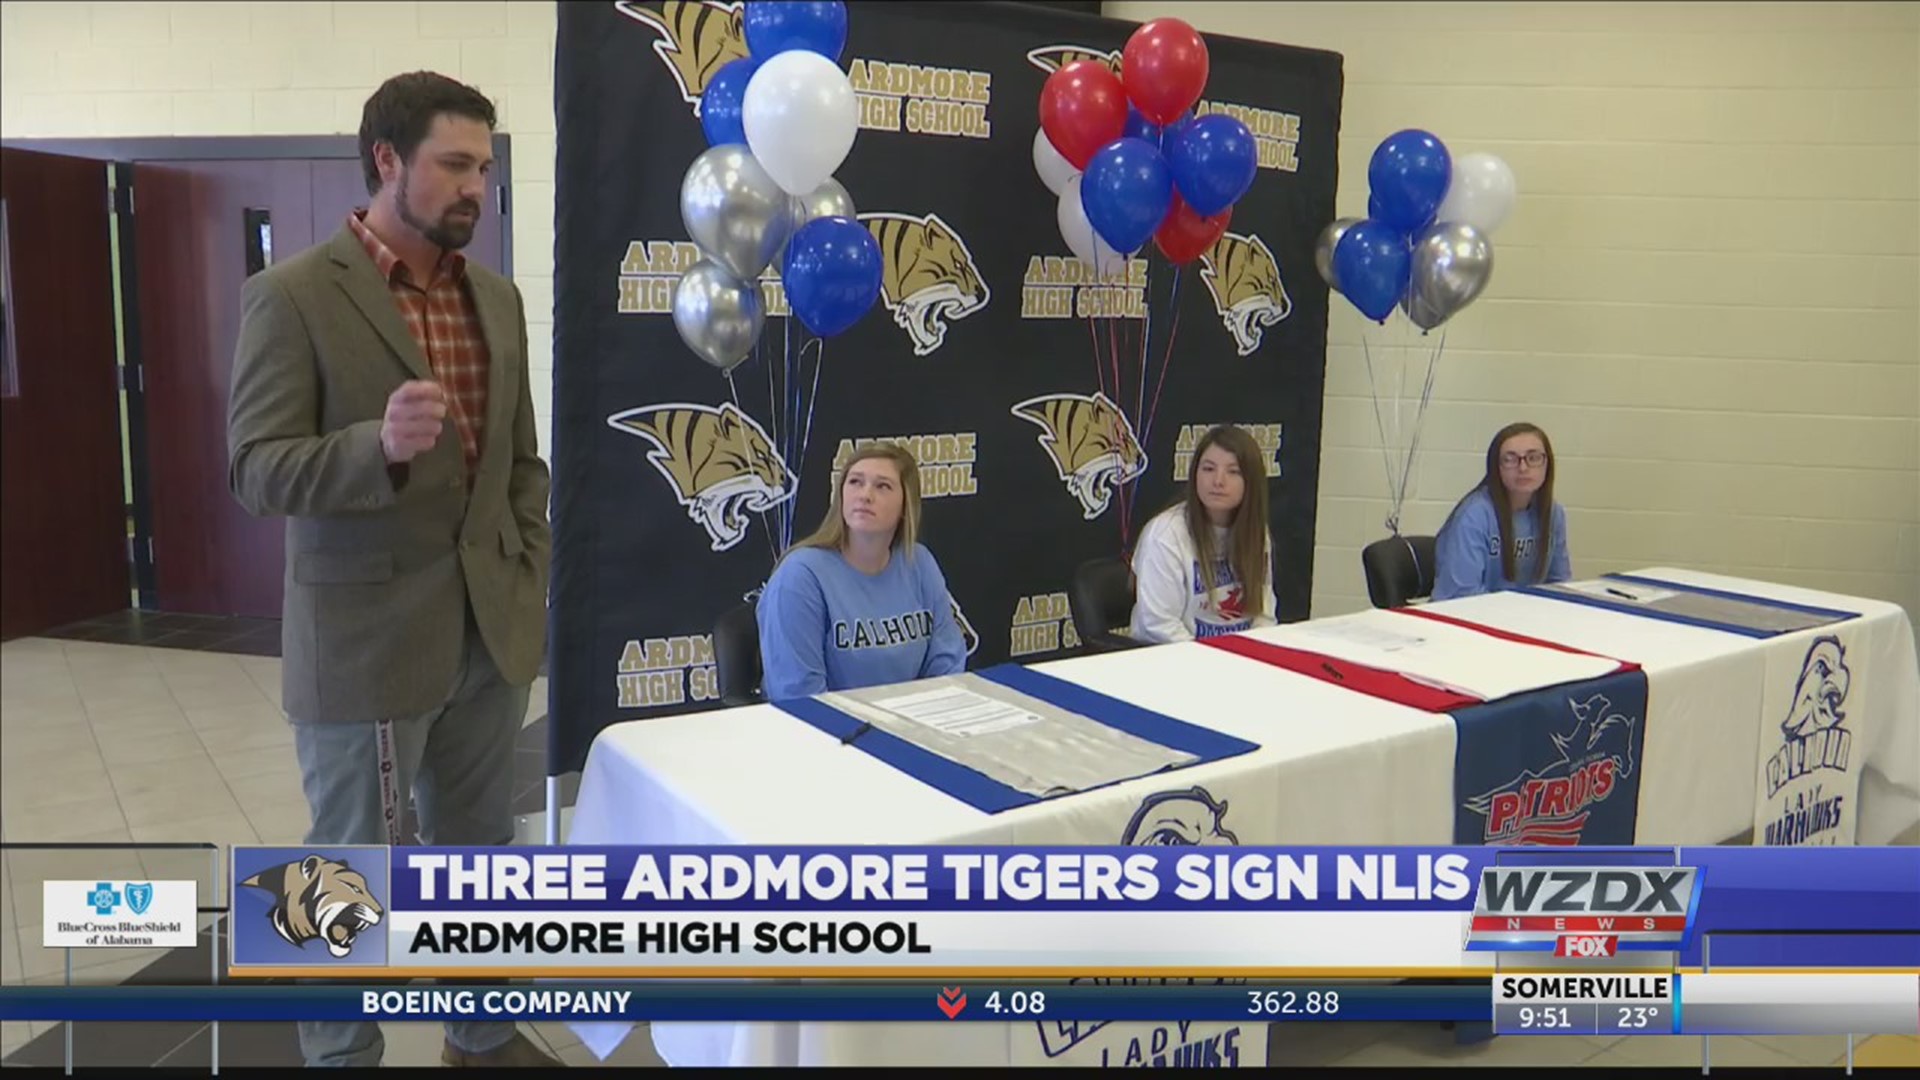 The fall sports signing period kicked off today across the nation and here in the Tennessee Valley we have several local standouts putting the pen to the paper.